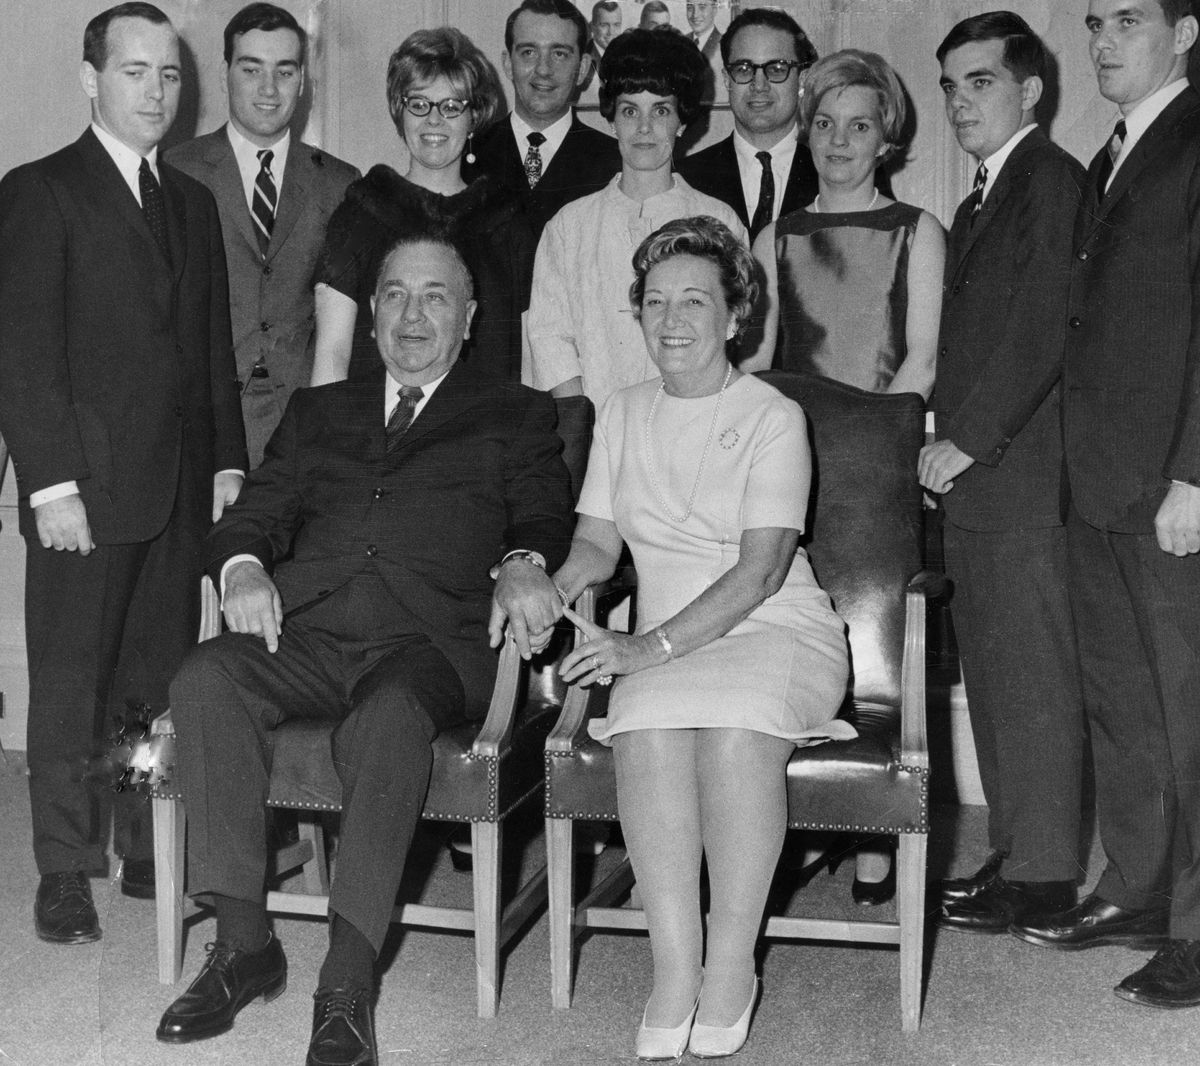 An April 20, 1967, Daley family portrait at City Hall. Mayor Richard J. Daley and his wife Sis Daley (front) with their sons and daughters standing behind them (from left): Michael Daley, William Daley, Patricia Daley Martino with her then-husband William P. Thompson, Mary Carol Daley Vanecko with her husband Robert Vanecko, Eleanor Daley, John Daley and Richard M. Daley.